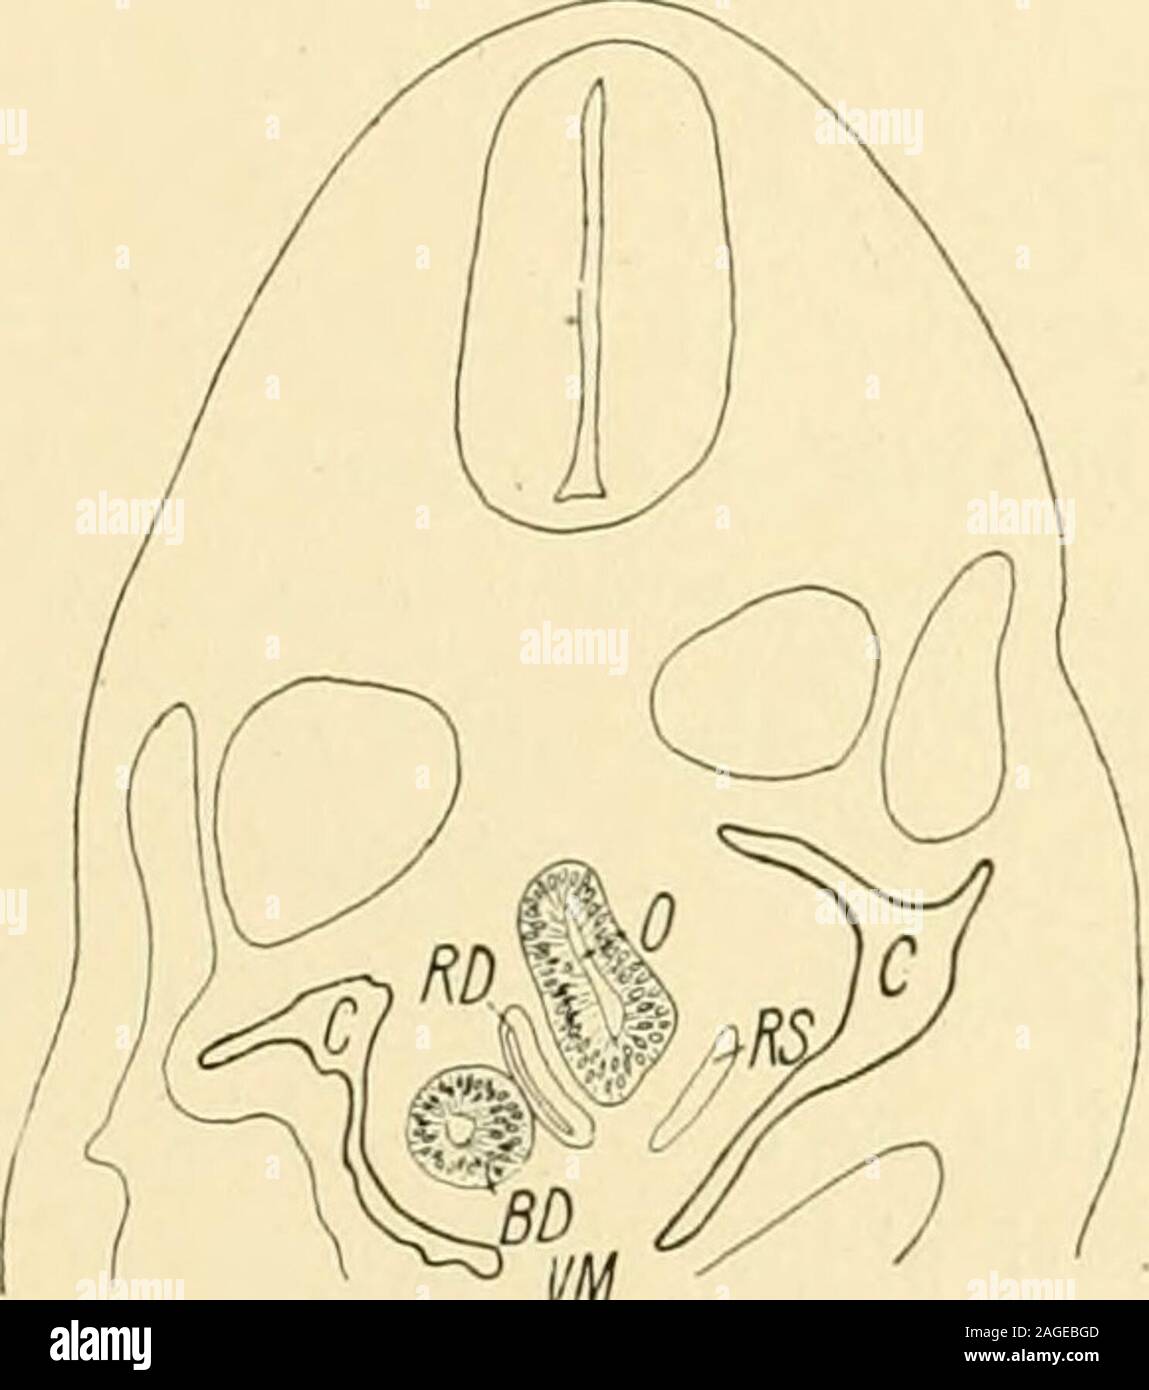 . The American journal of anatomy. 39 precocious as I possess later stages where the two systems are in opencommunication at a lower level than is shown in this specimen. At thelevel where the Mesocardium posterior begins (Fig. 7 VM), the epithe-lium lining the fore gut is columnar and consists, except in the ventraland dorsal angles, usually of a double layer of cells. In the anlage of thelungs (Fig. 8), it is slightly higher and shows a more active karyoki-netic process. A similar layer of endoblast extends out into the primitivebronchi. At the tips, cell division is proceeding rapidly. The Stock Photo